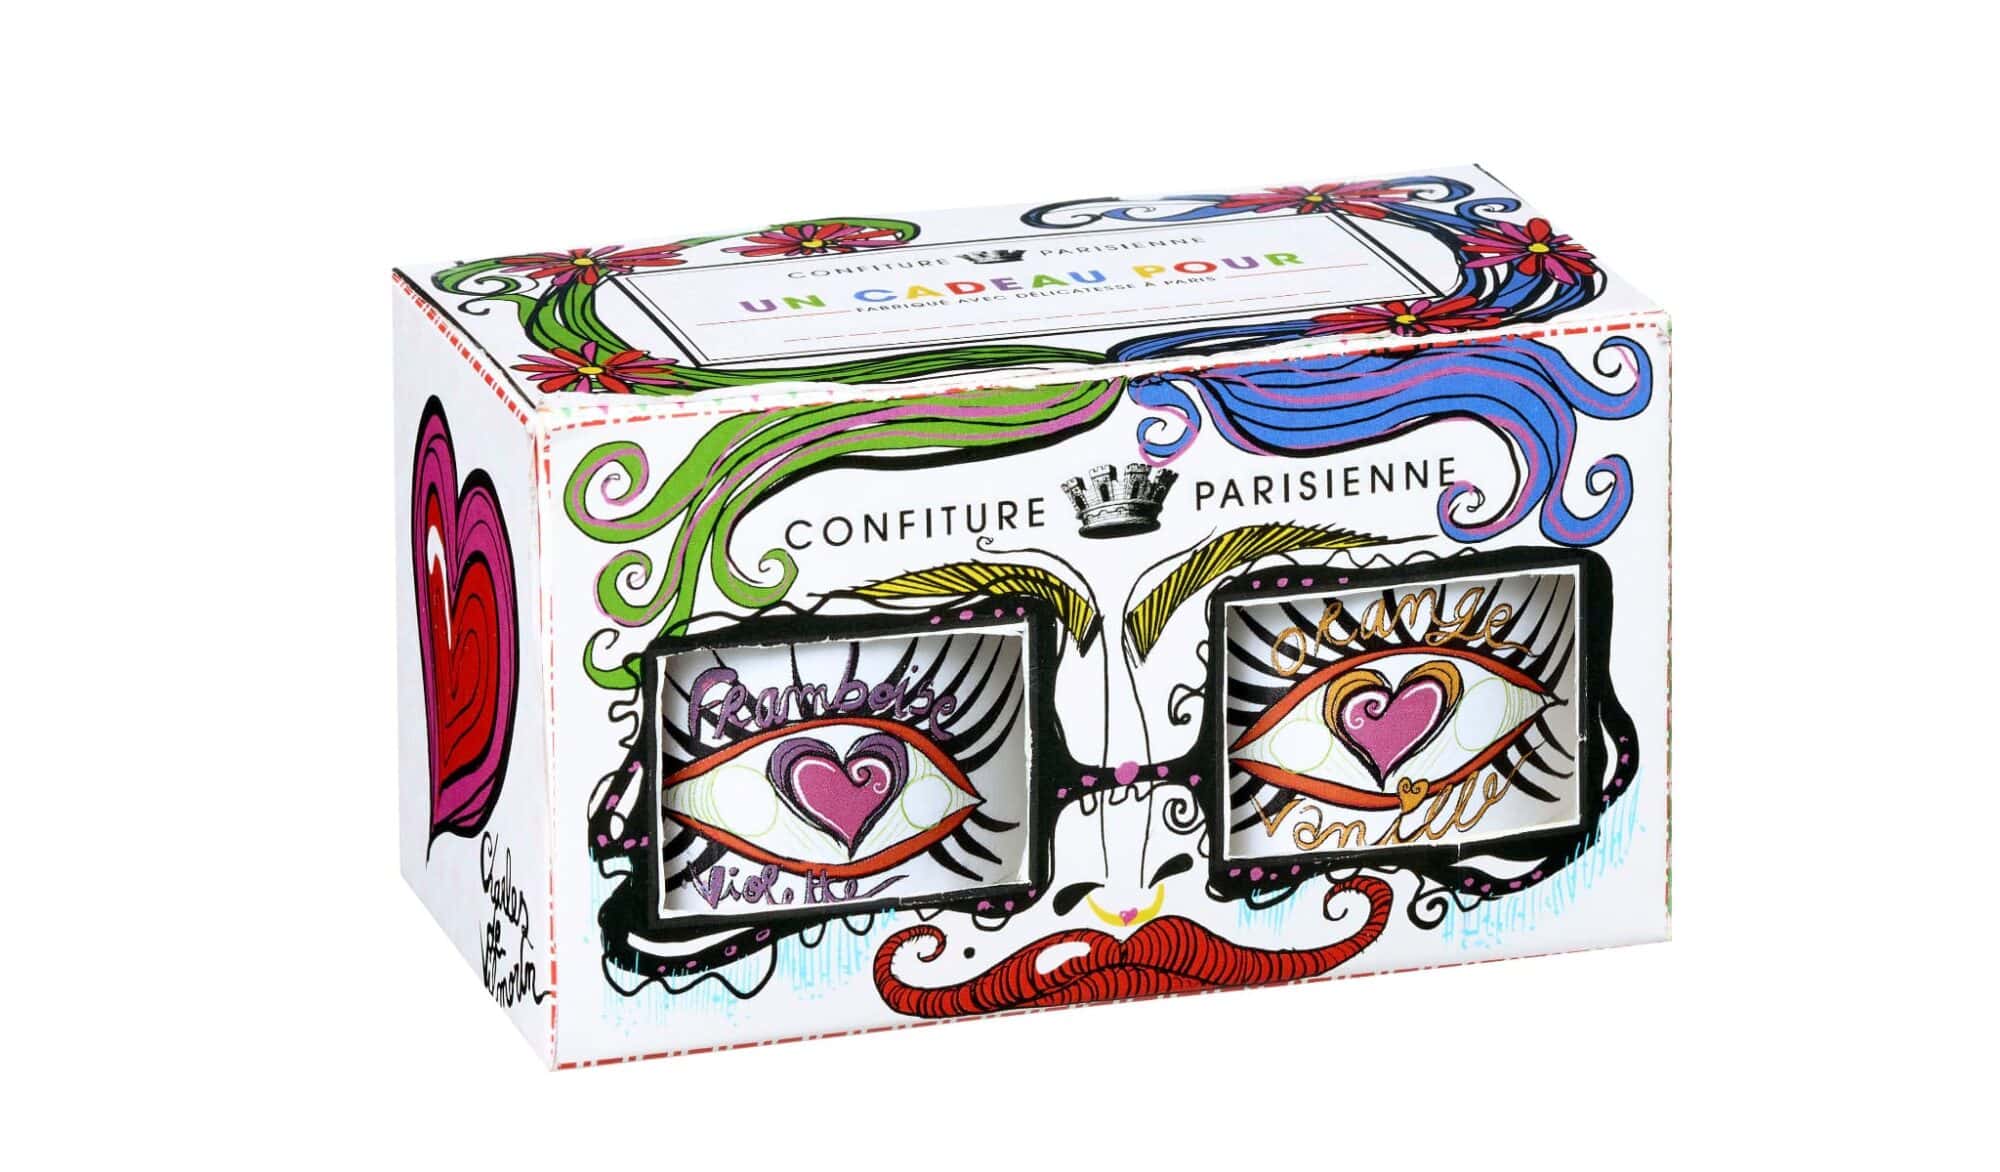 Confiture by Pierre Marcolini made in collaboration with Charles de Vilmorin for Christmas at Galeries Lafayette.